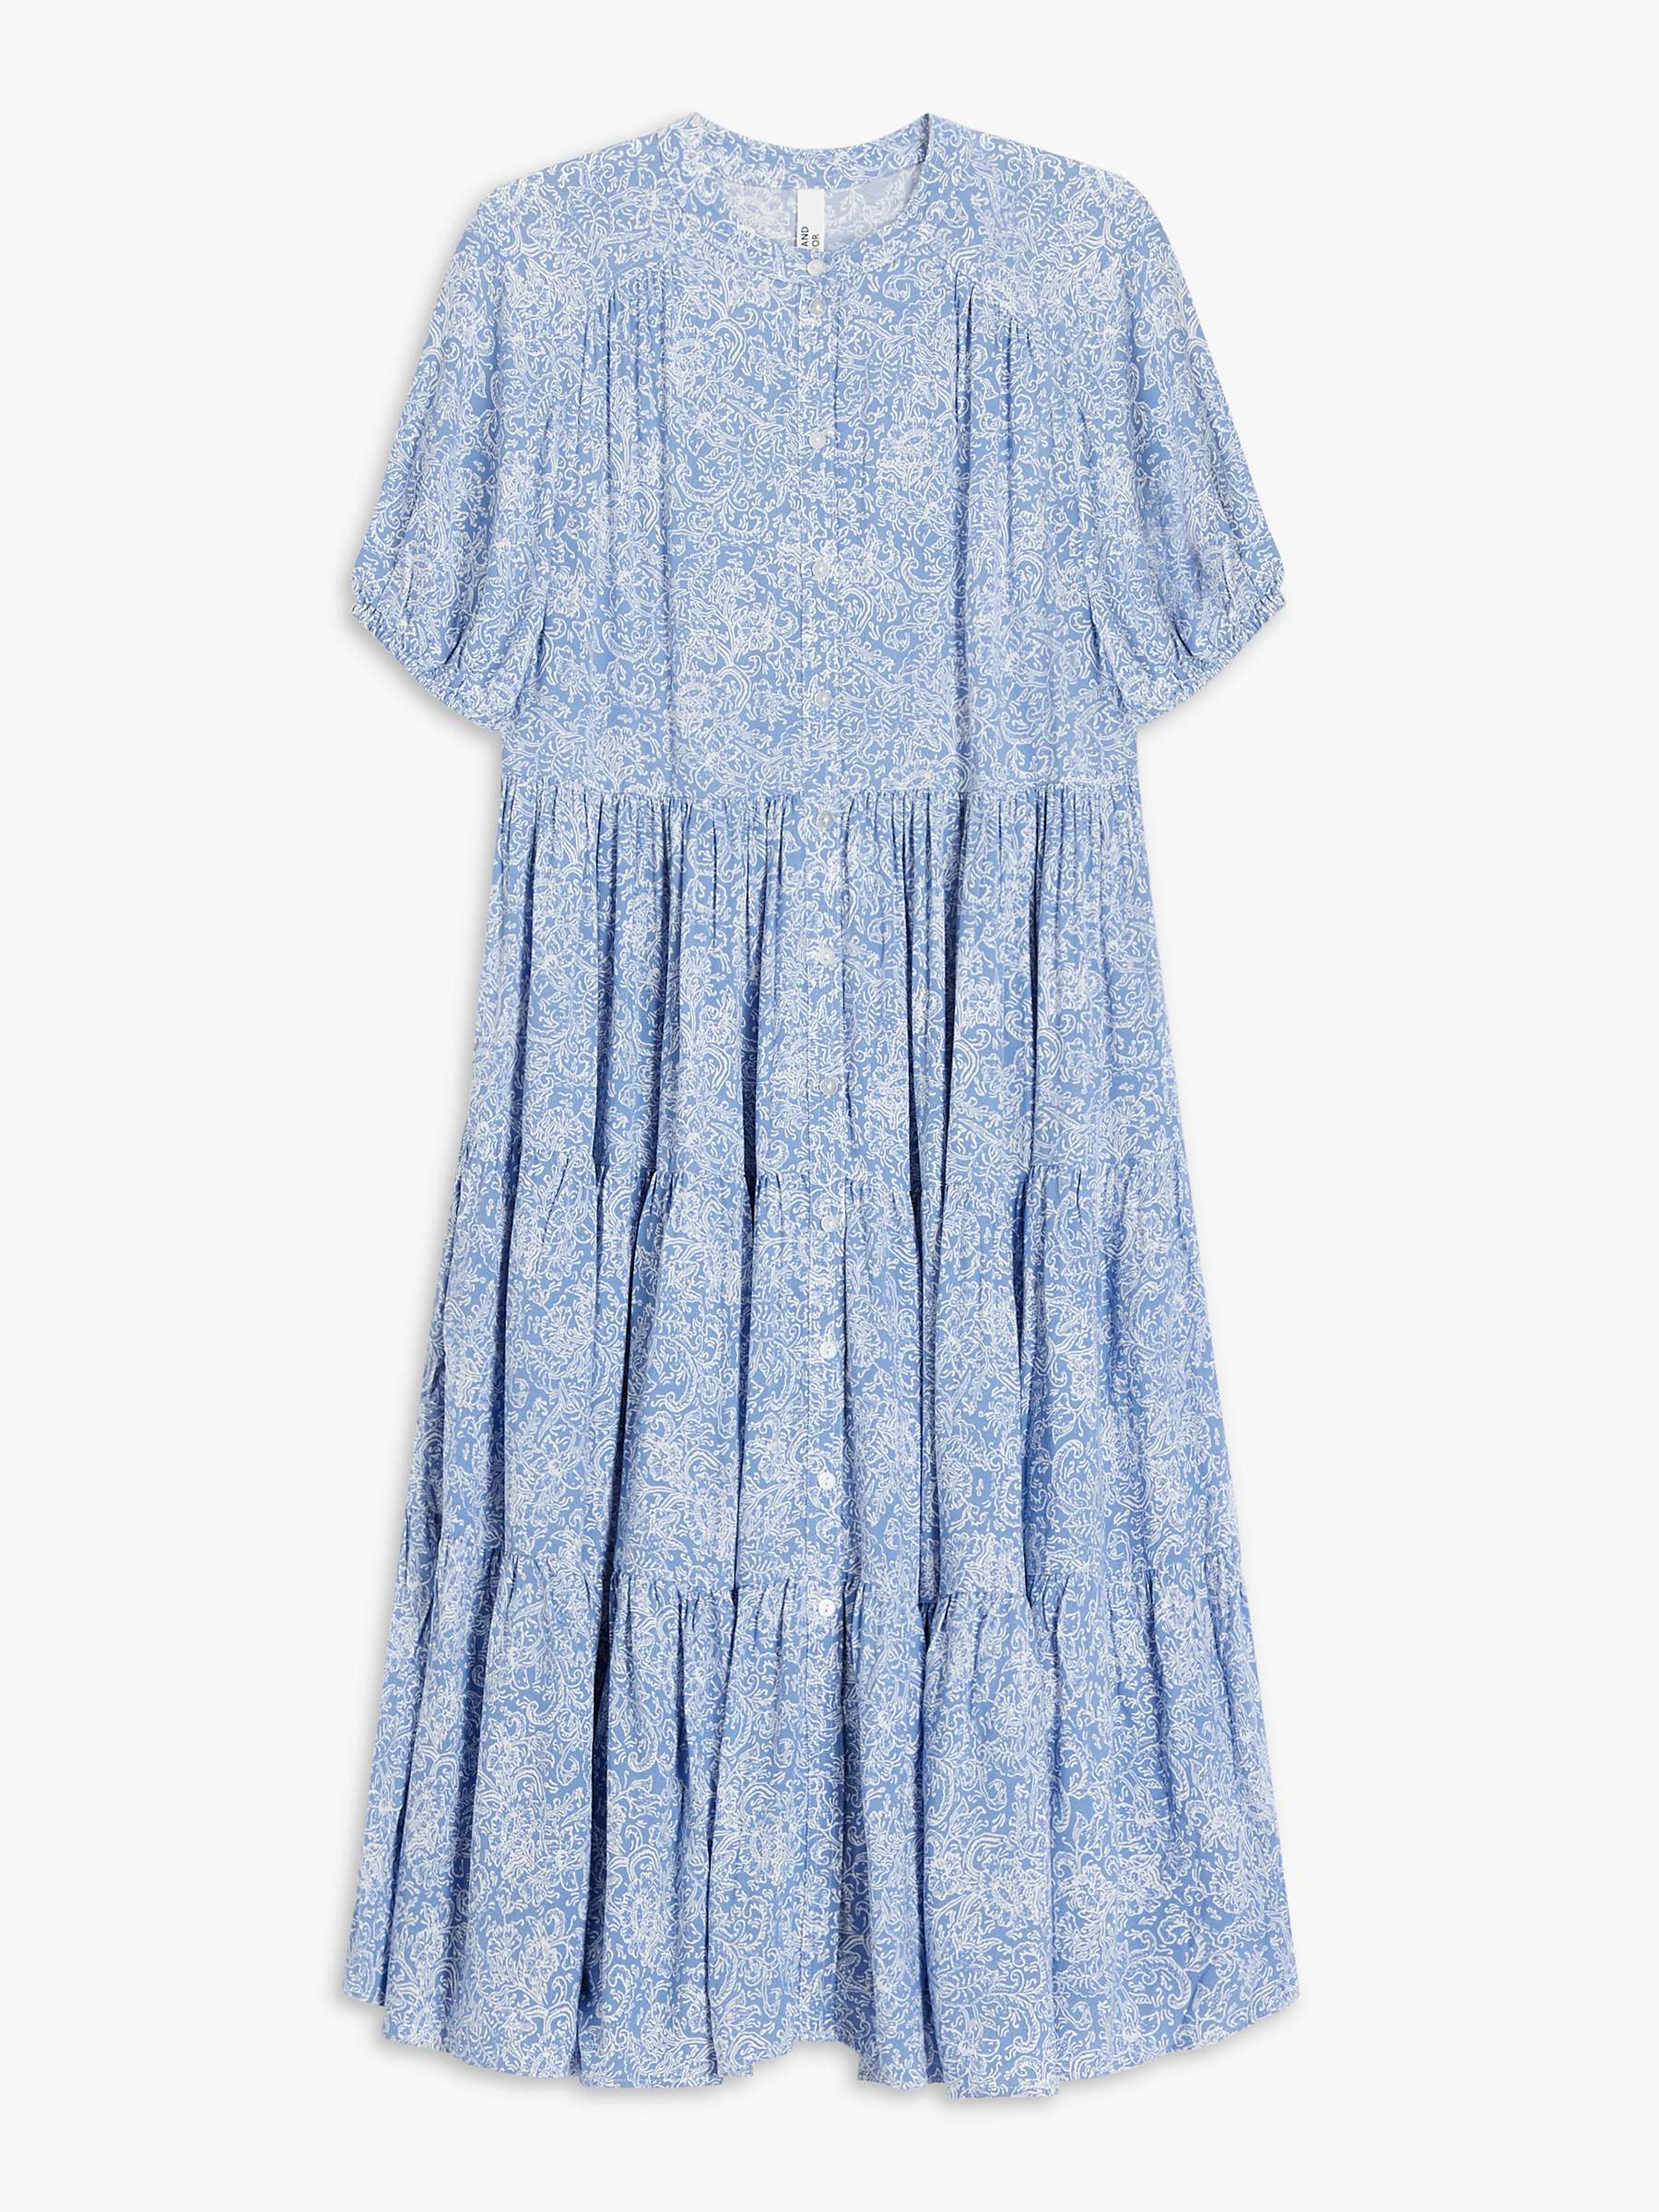 AND/OR Brooke Mono Floral Dress, Blue at John Lewis & Partners